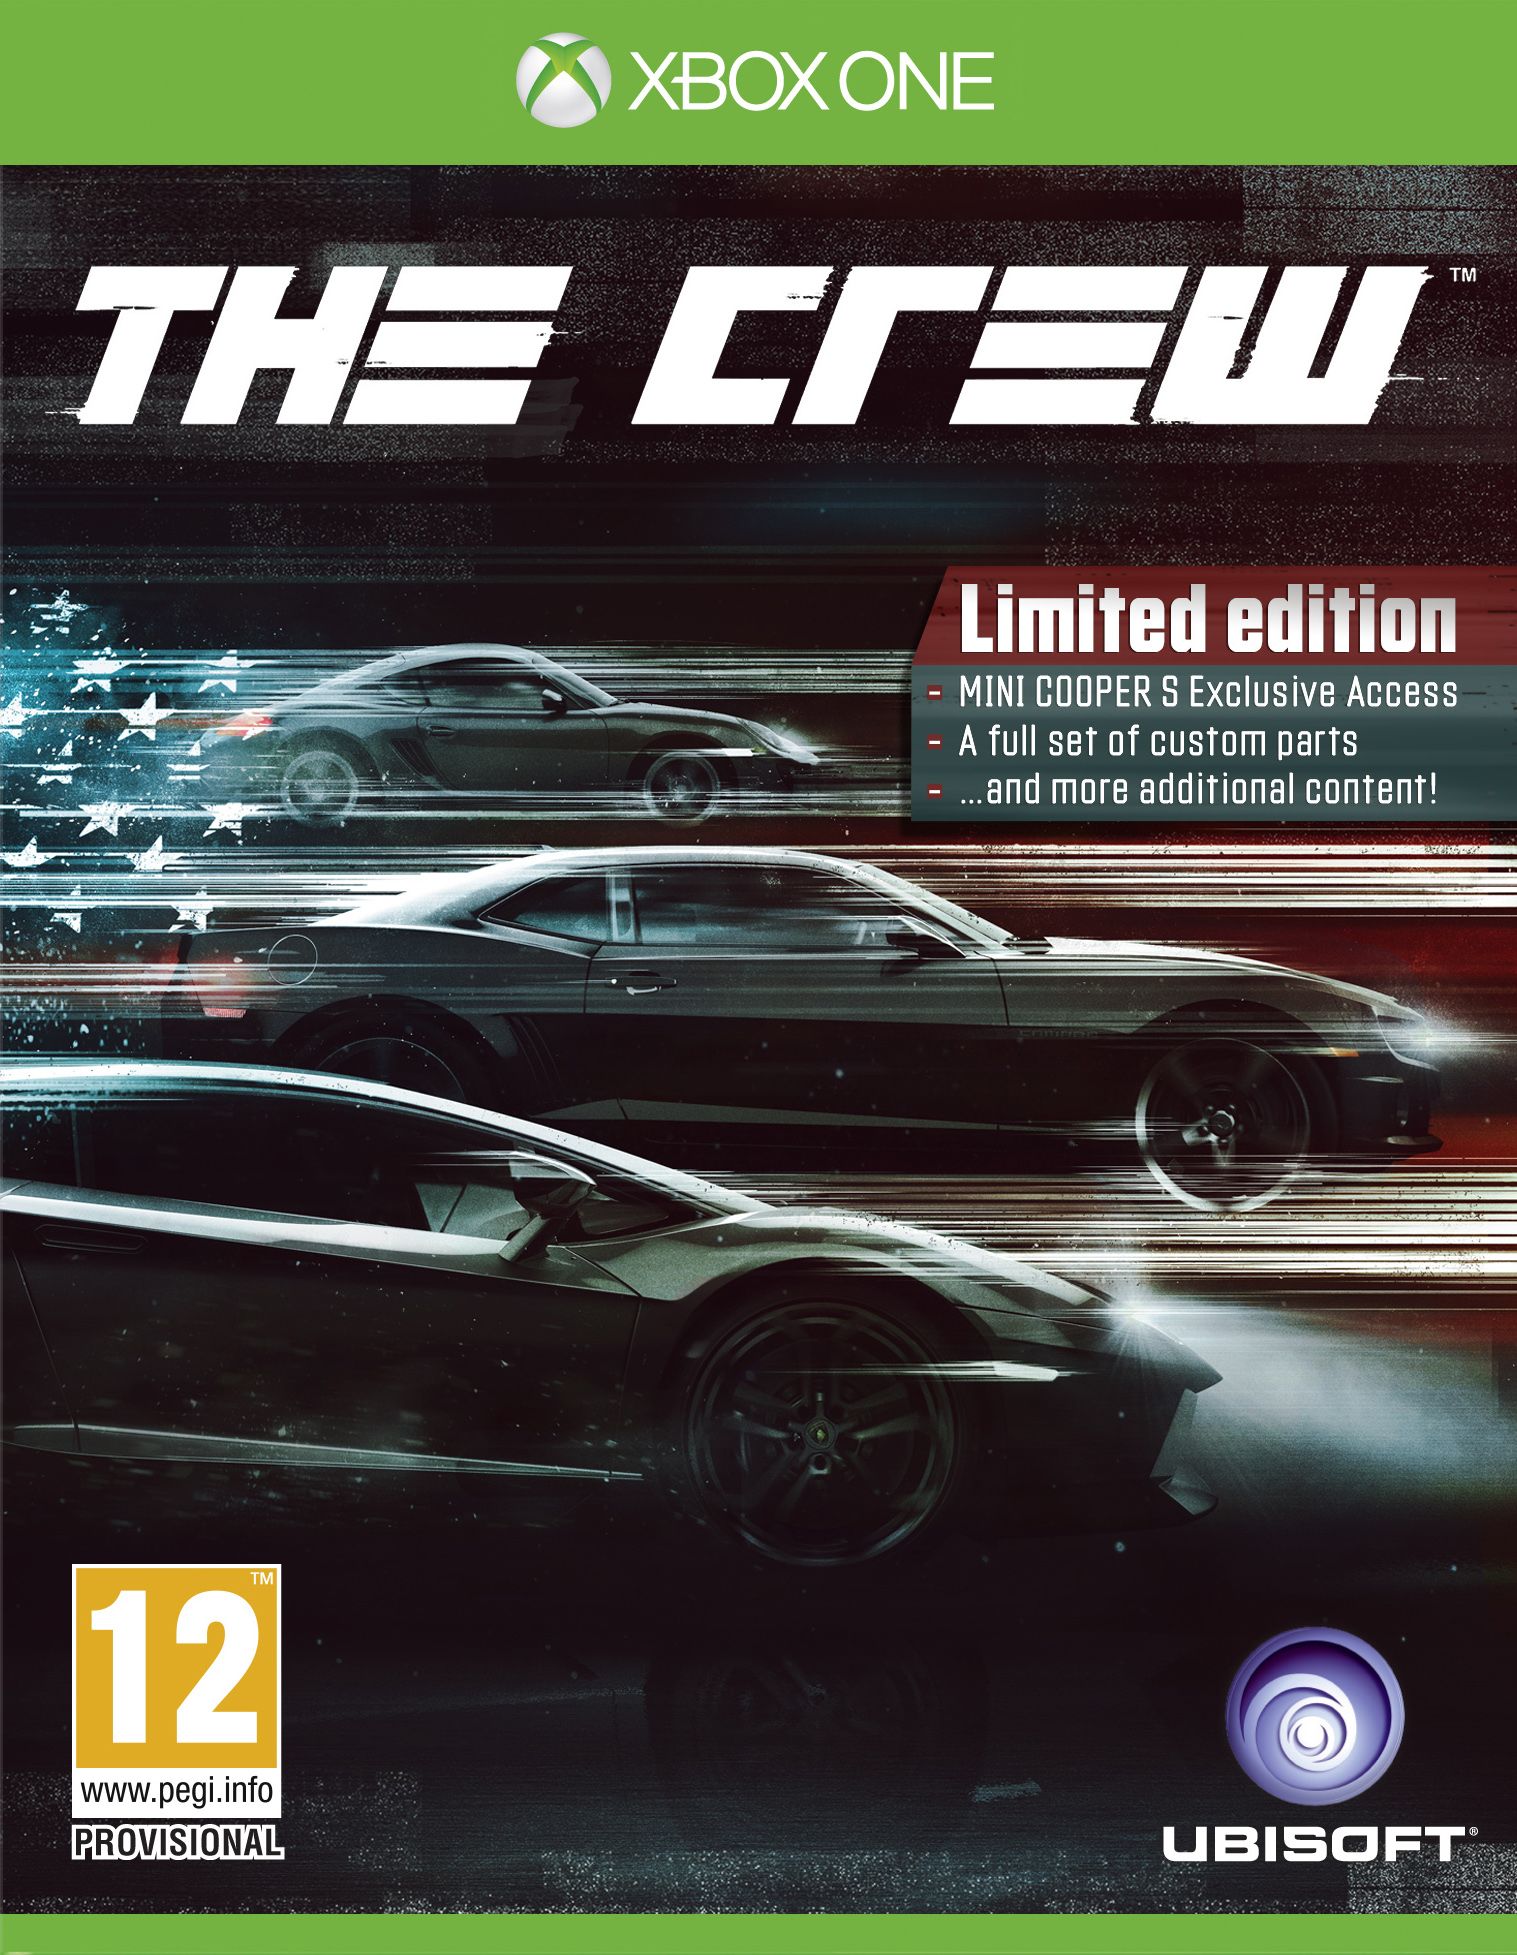 Acheter The Crew Limited Edition - Xbox One prix promo neuf et occasion pas cher